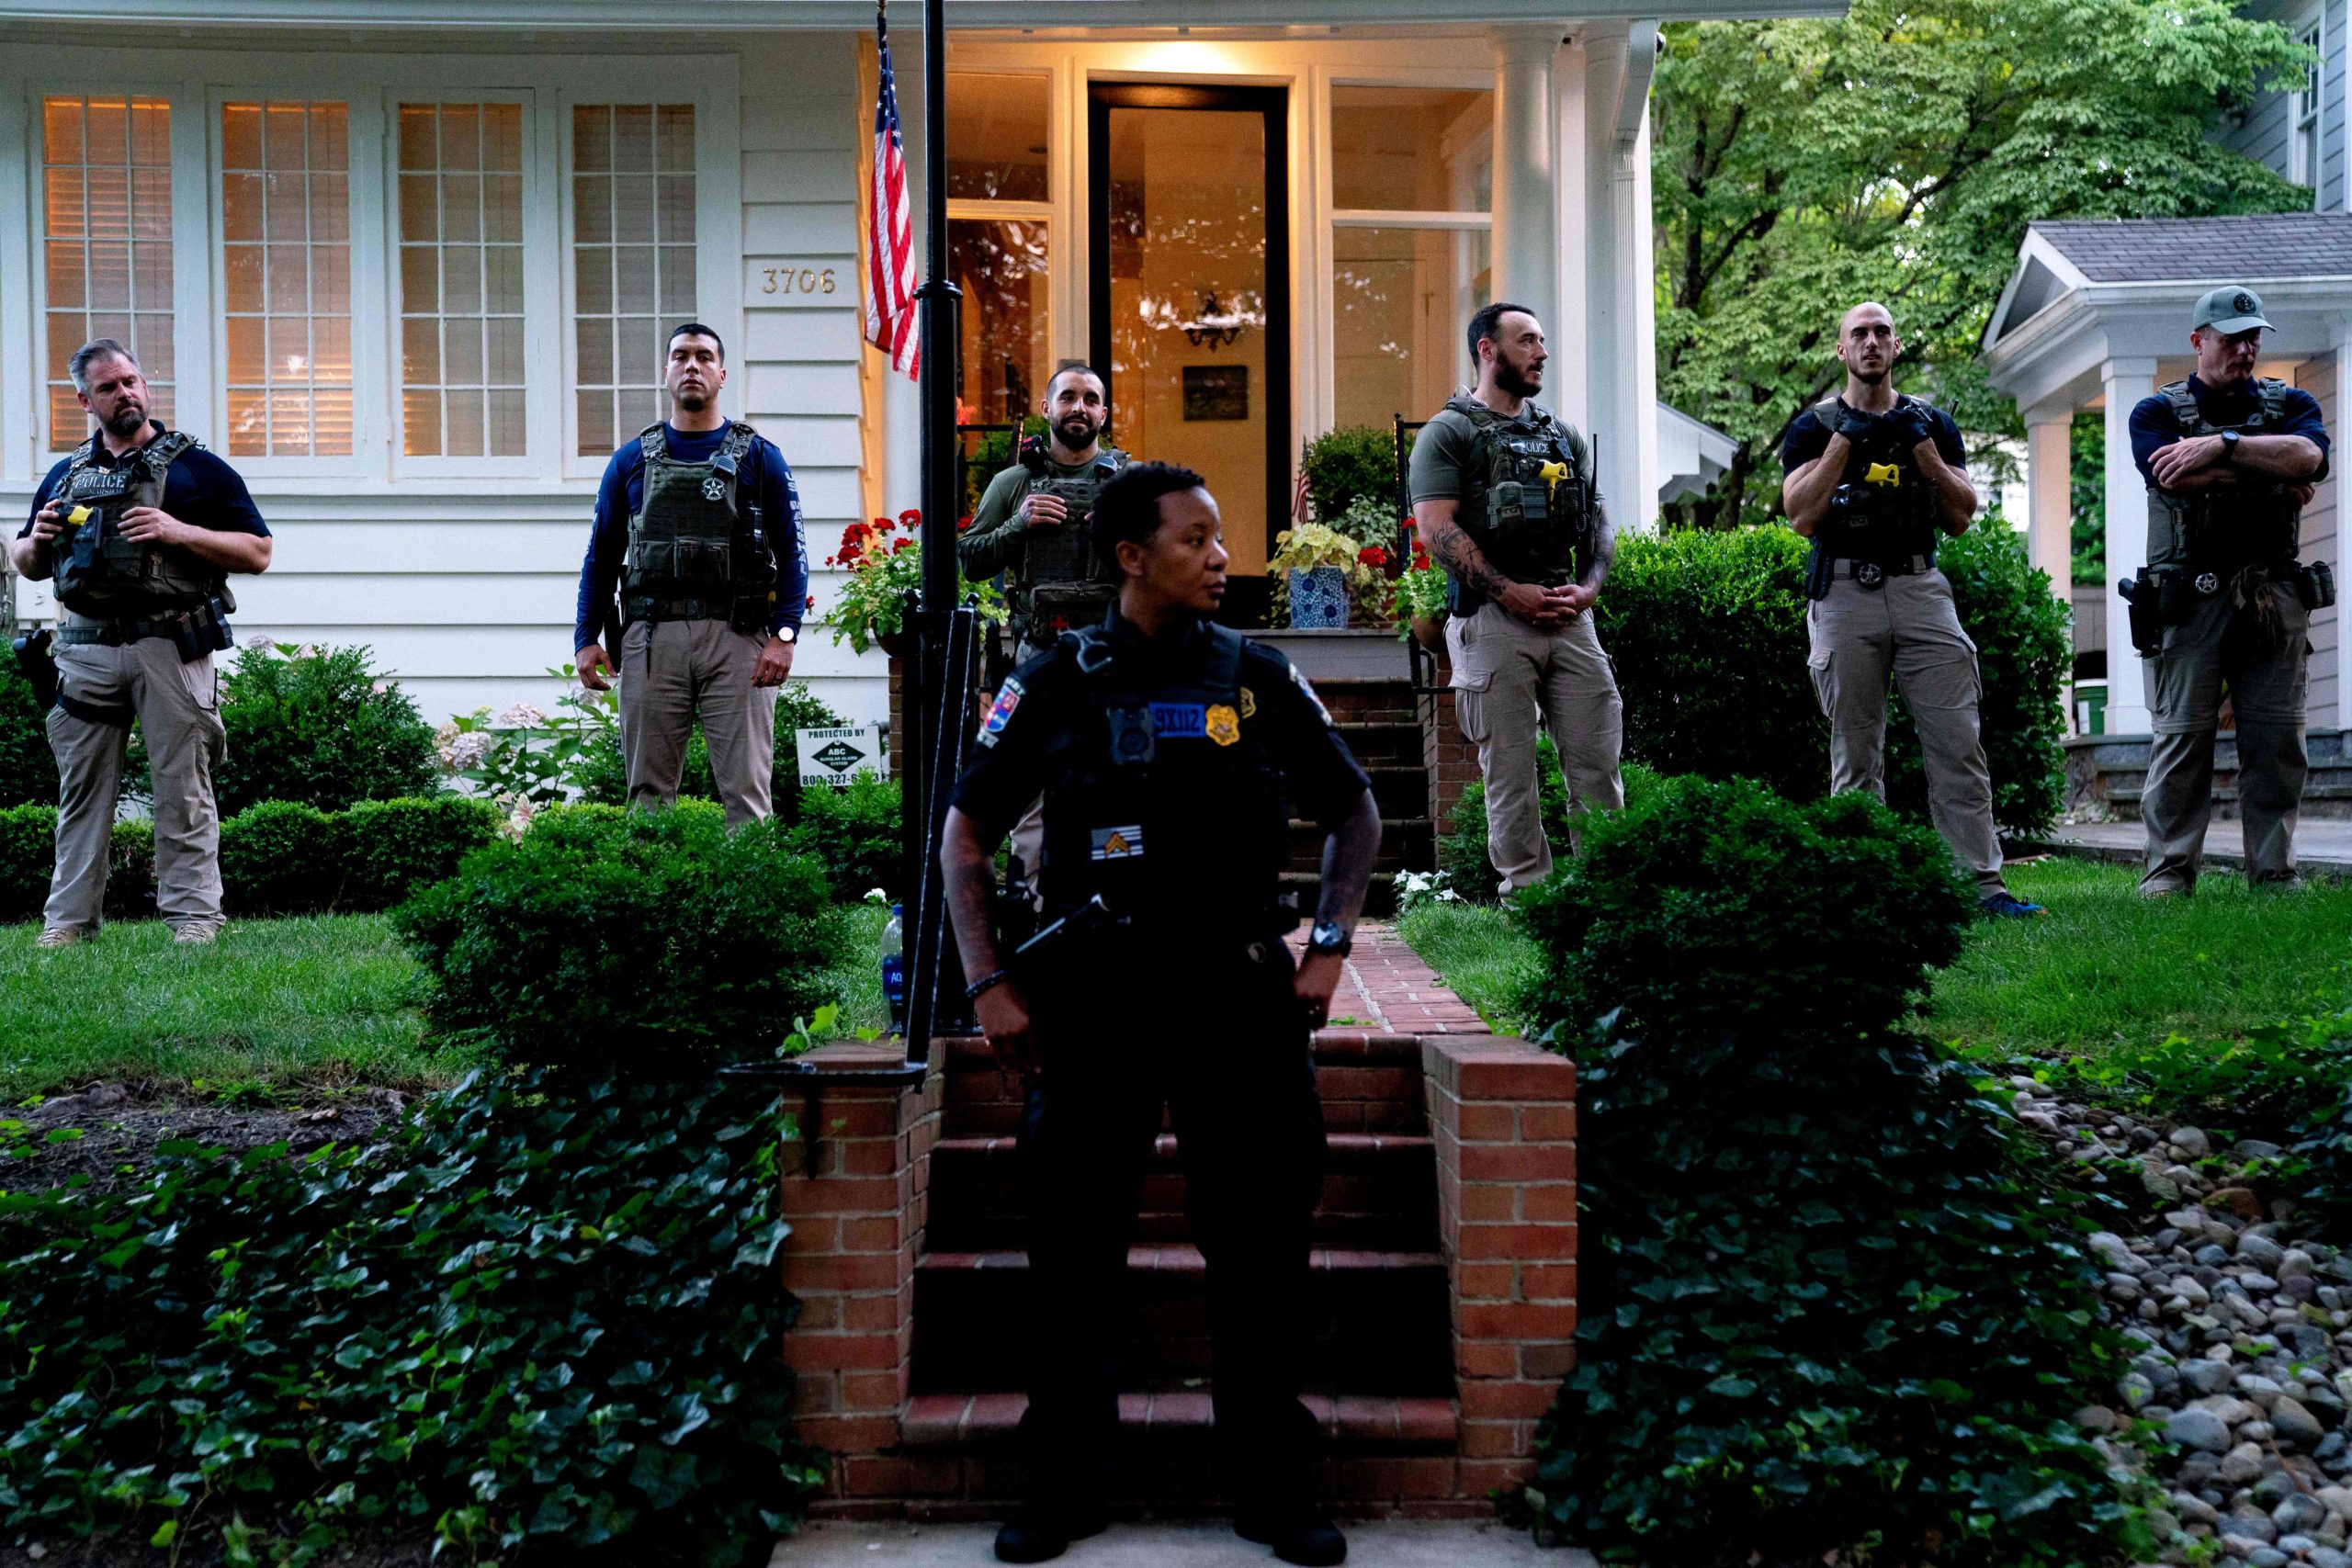 Police look on as abortion rights demonstrators march past the house of US Supreme Court Justice Brett Kavanaugh in Chevy Chase, Maryland, on June 29, 2022. (Photo by Stefani Reynolds / AFP)